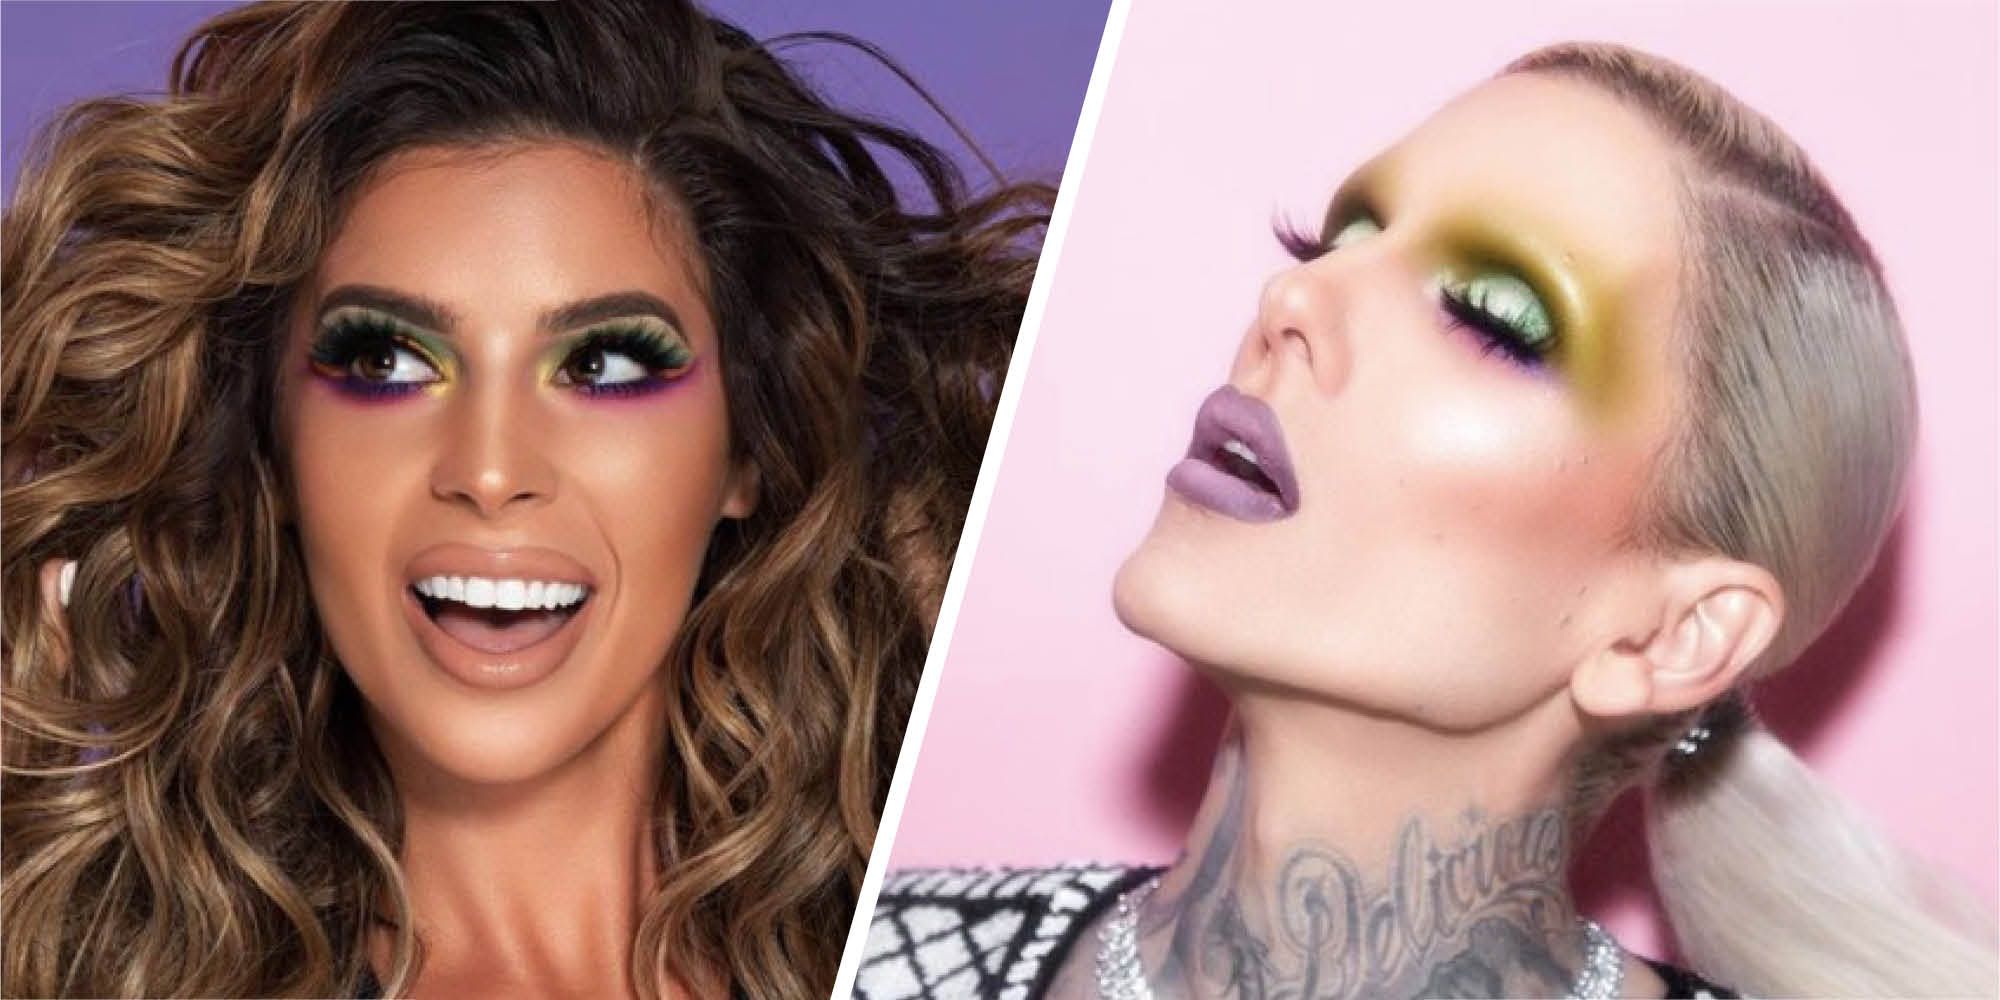 Jeffree Star Just Responded to Laura Lee's YouTube Apology Video